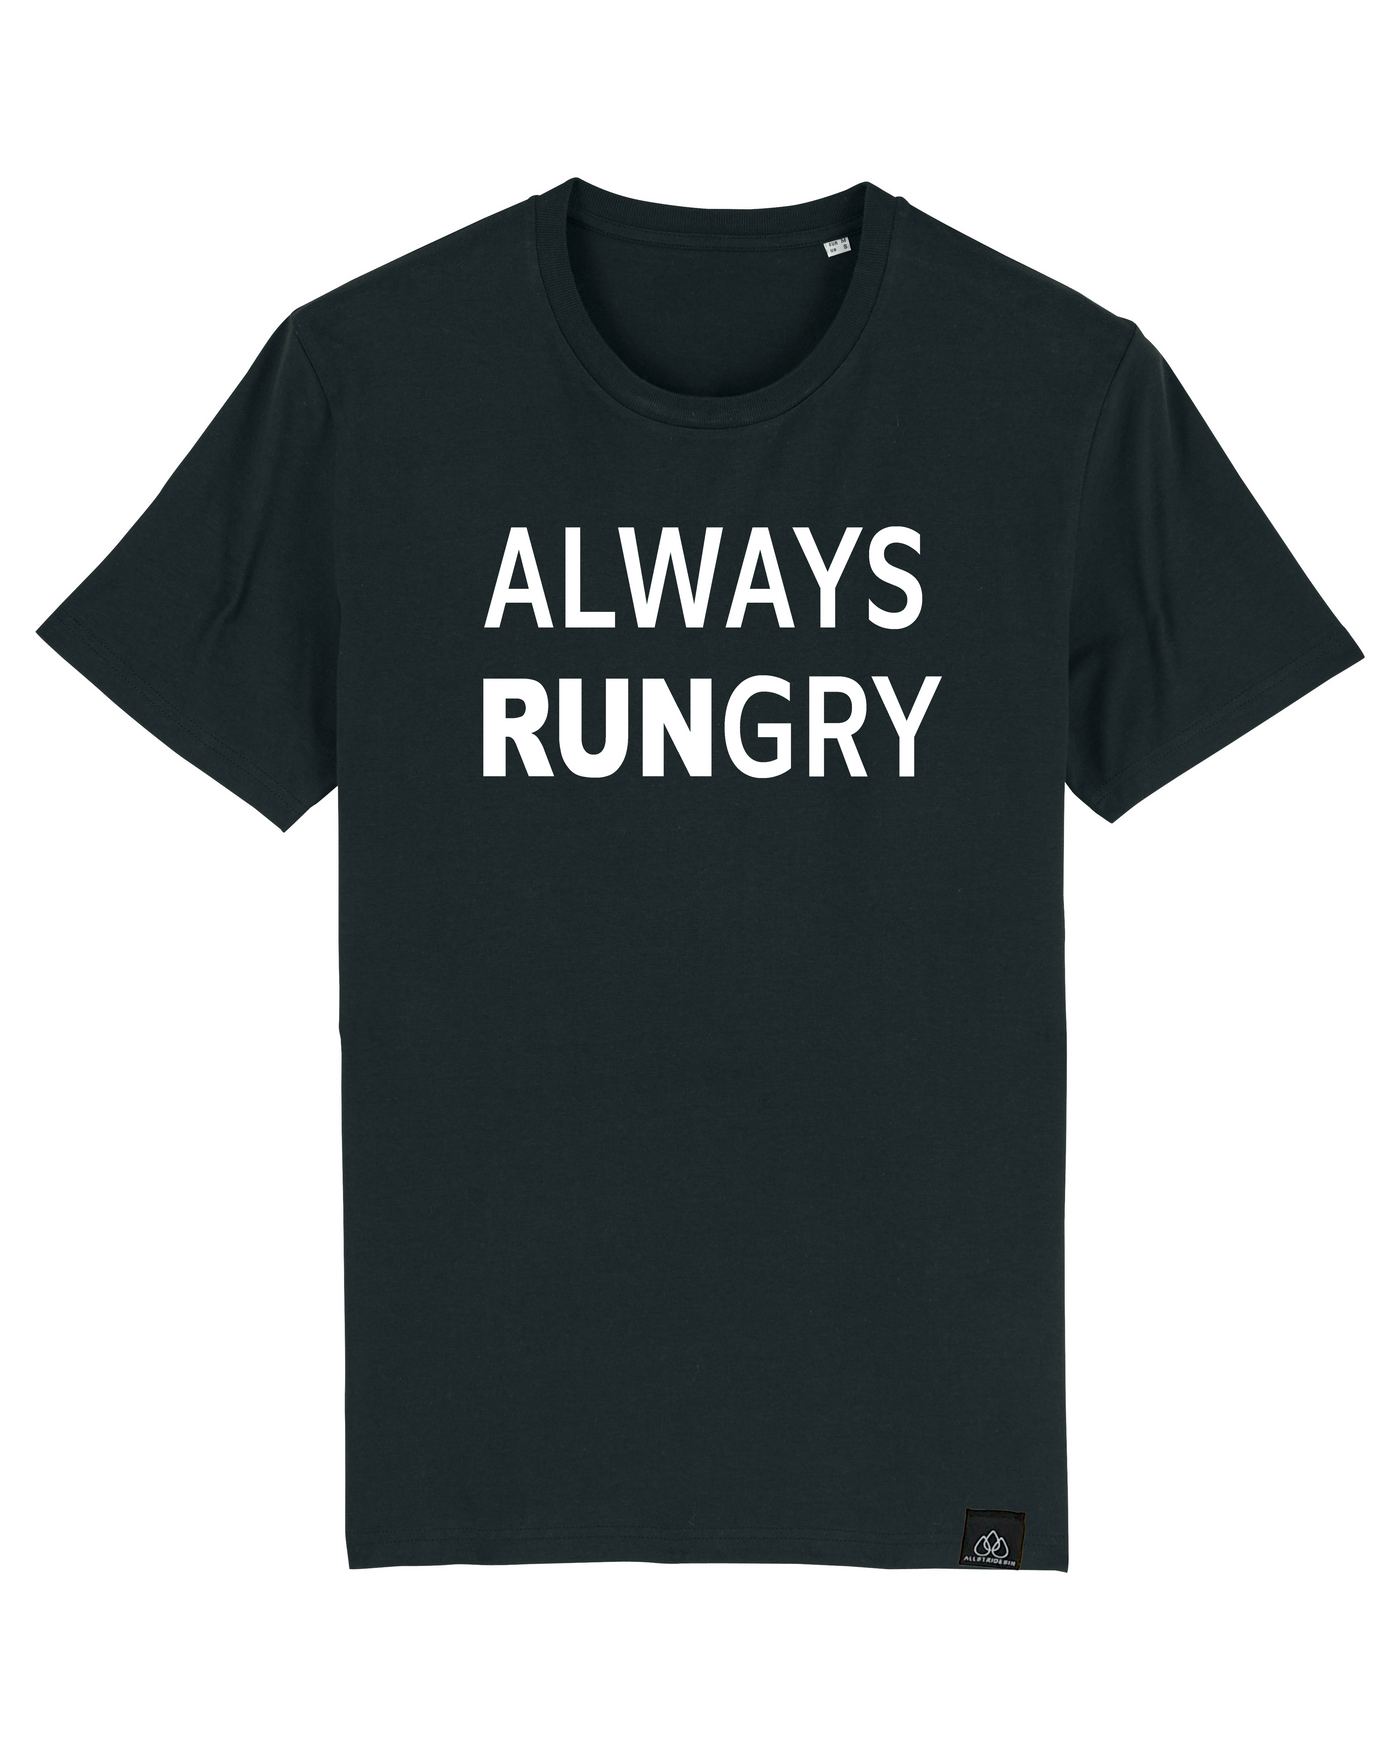 ALWAYS RUNGRY - ICONIC UNISEX T-SHIRT | ALLSTRIDESIN®